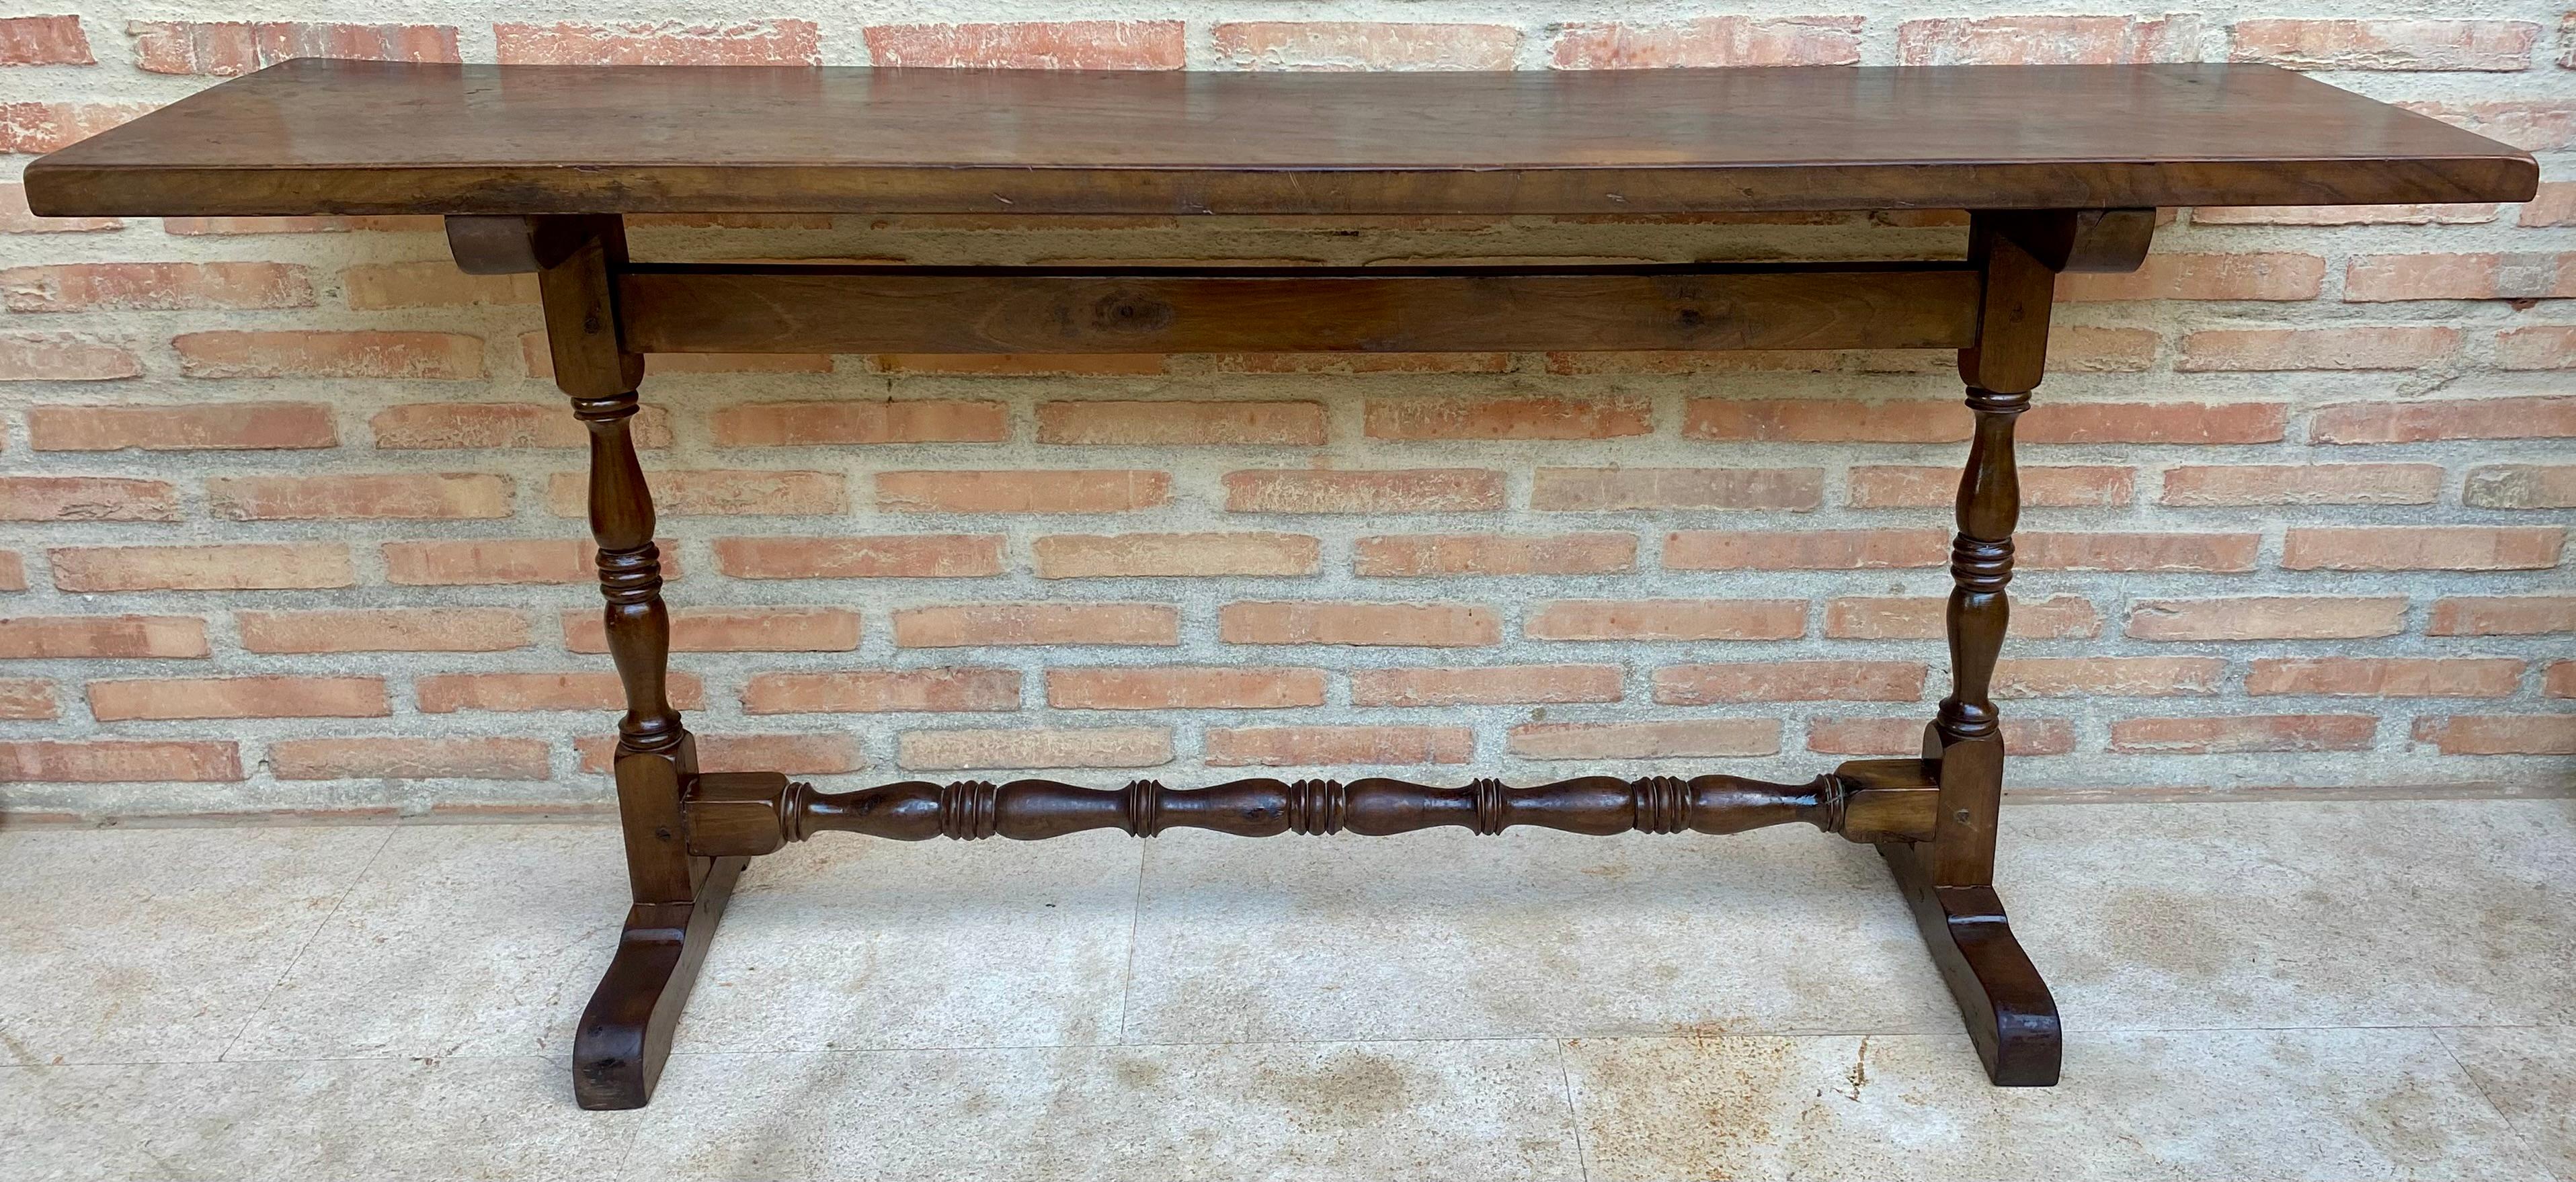 Rare Mid-Century Spanish-style console table, it has the typical turned bars of this period. Shown in original condition, includes refinishing.